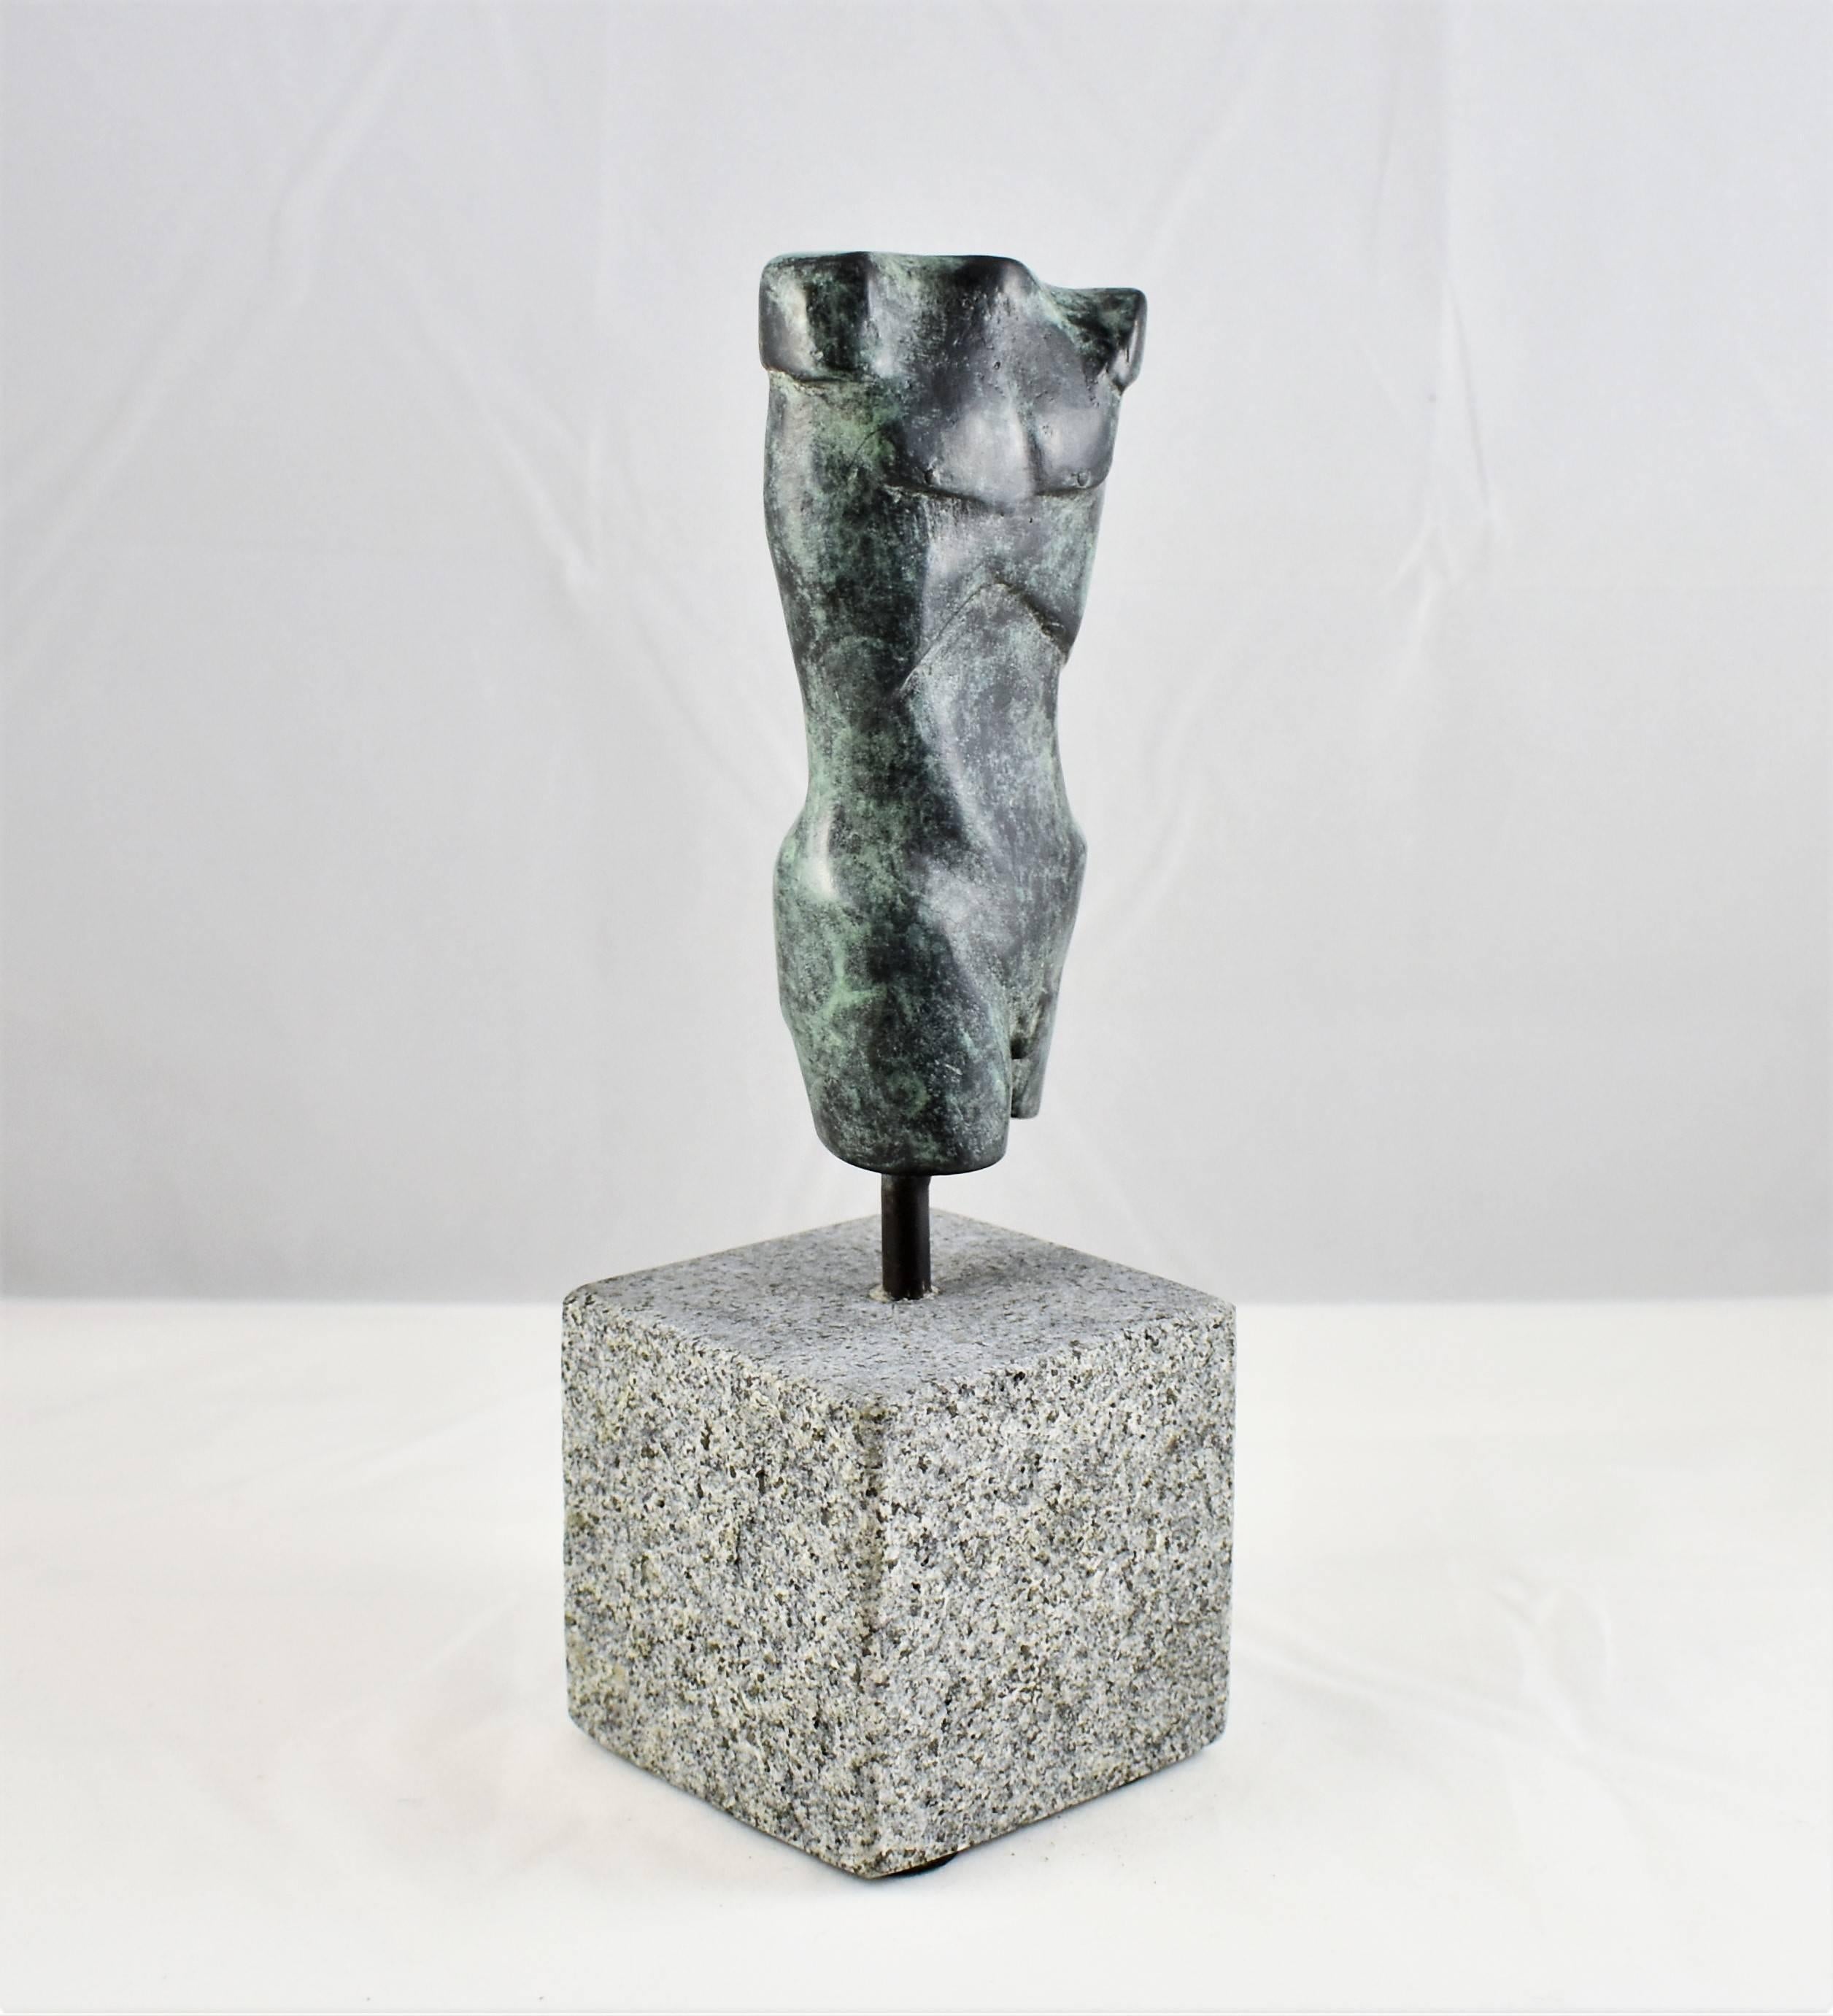 A modern bronze sculpture of a male form/torso with a Blue Green/Turquoise Patina finish. Hand made by the artist then hand cast. Modernistic and artistic design capturing the essence of the male form with masculine lines, beautiful from every